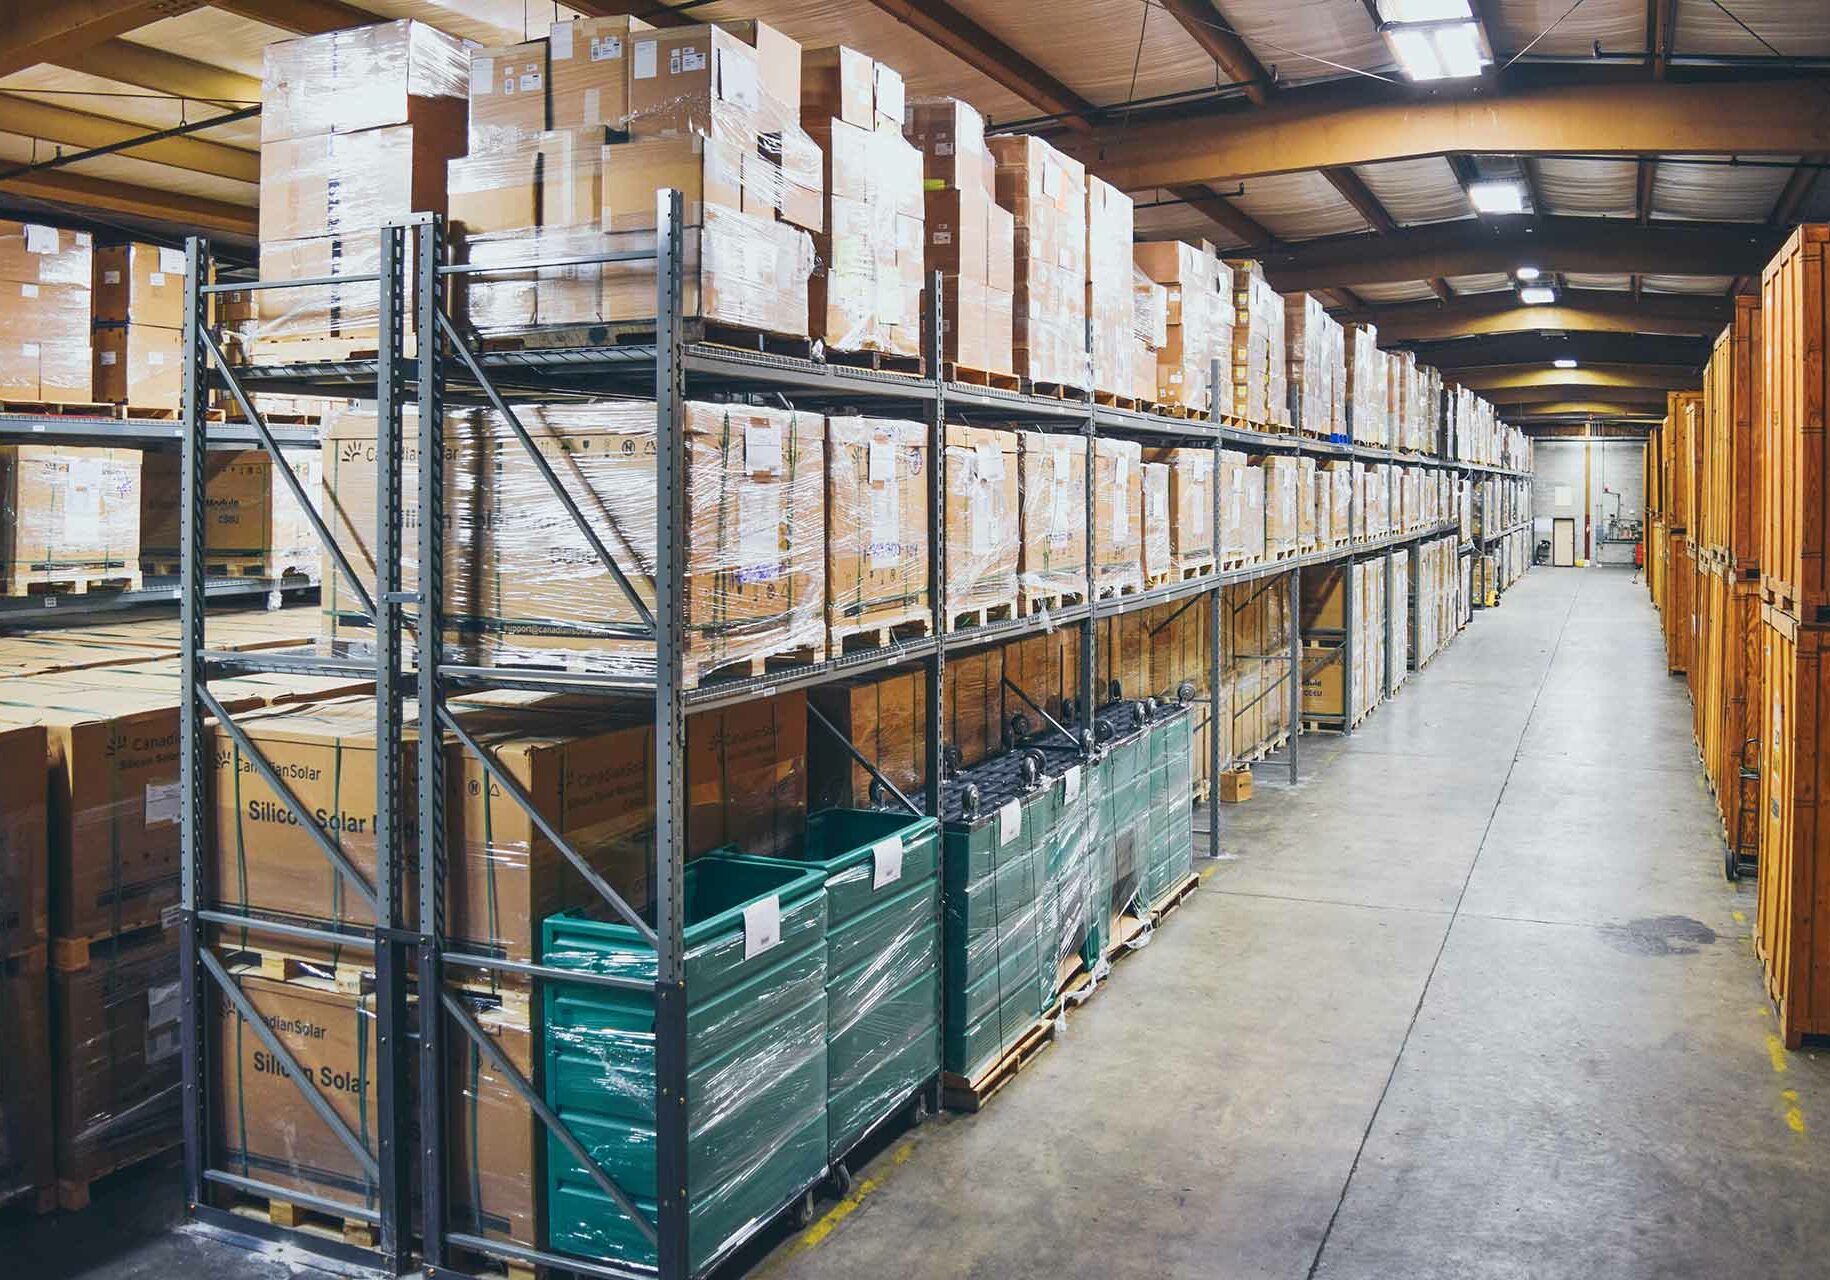 An image of a industrial warehouse used for storing and relocating services.